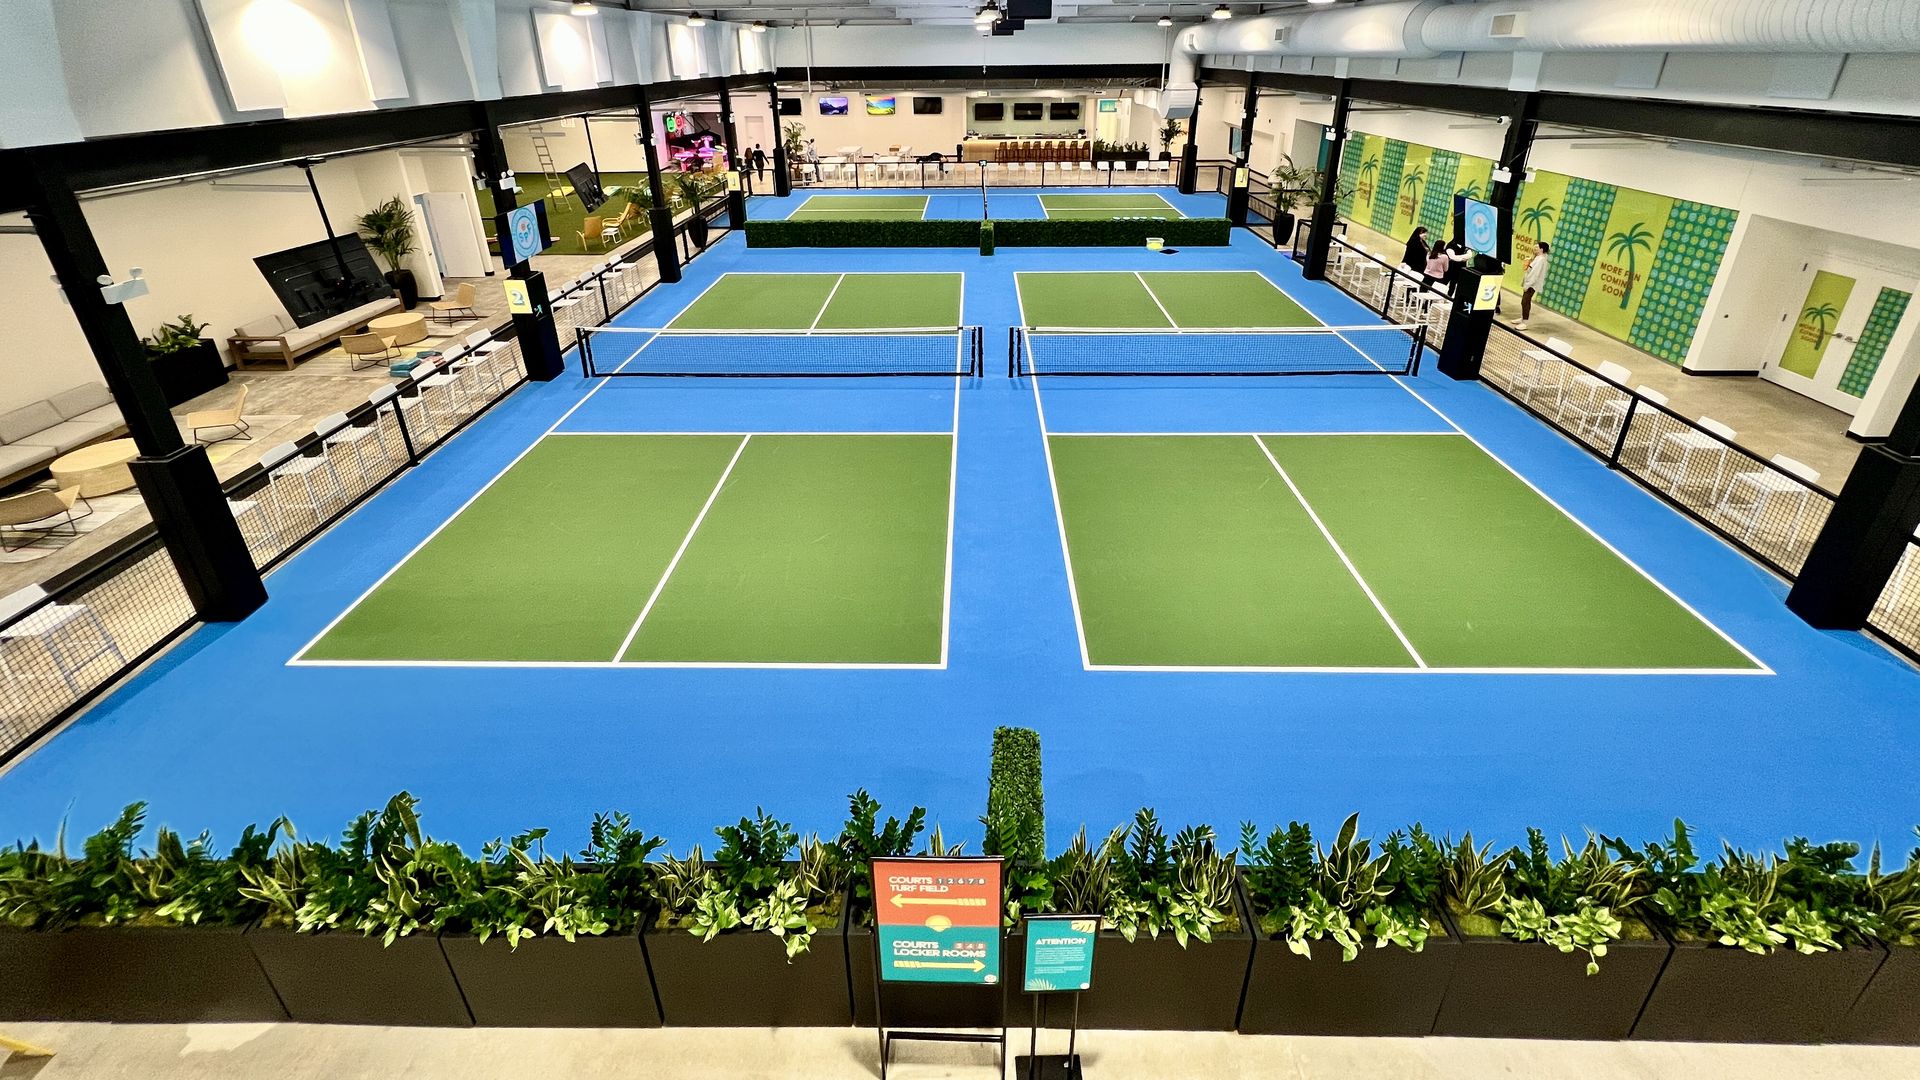 Image of the courts inside the newest and largest indoor pickleball facility in Chicago, located at Lincoln Park.